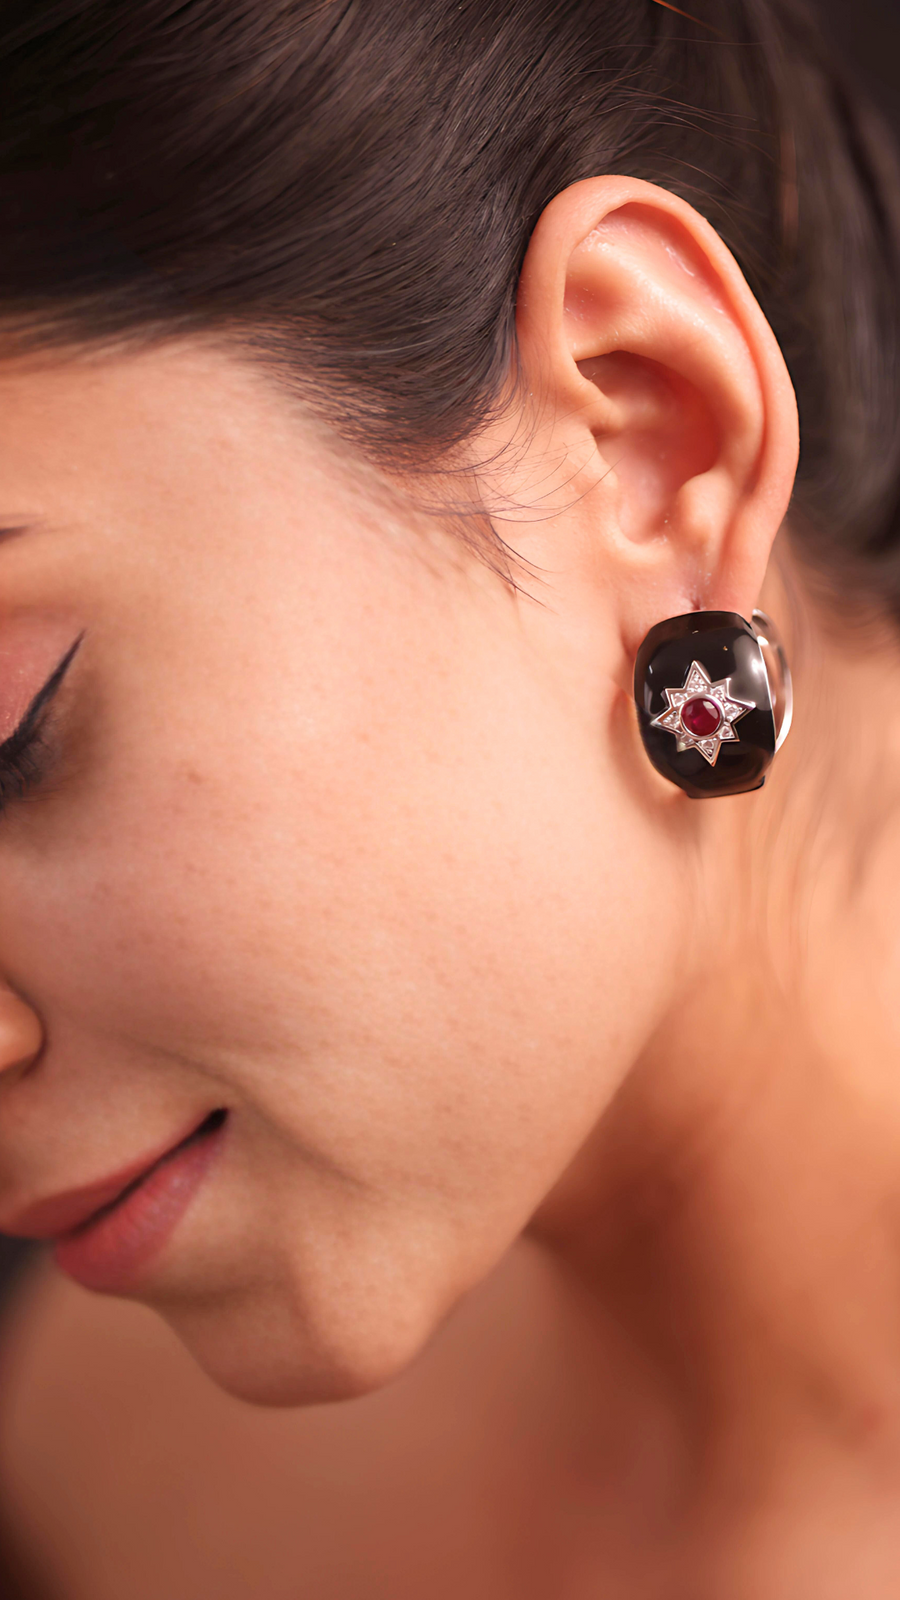 A woman wearing elegant earrings, adding a touch of sophistication to her overall appearance.